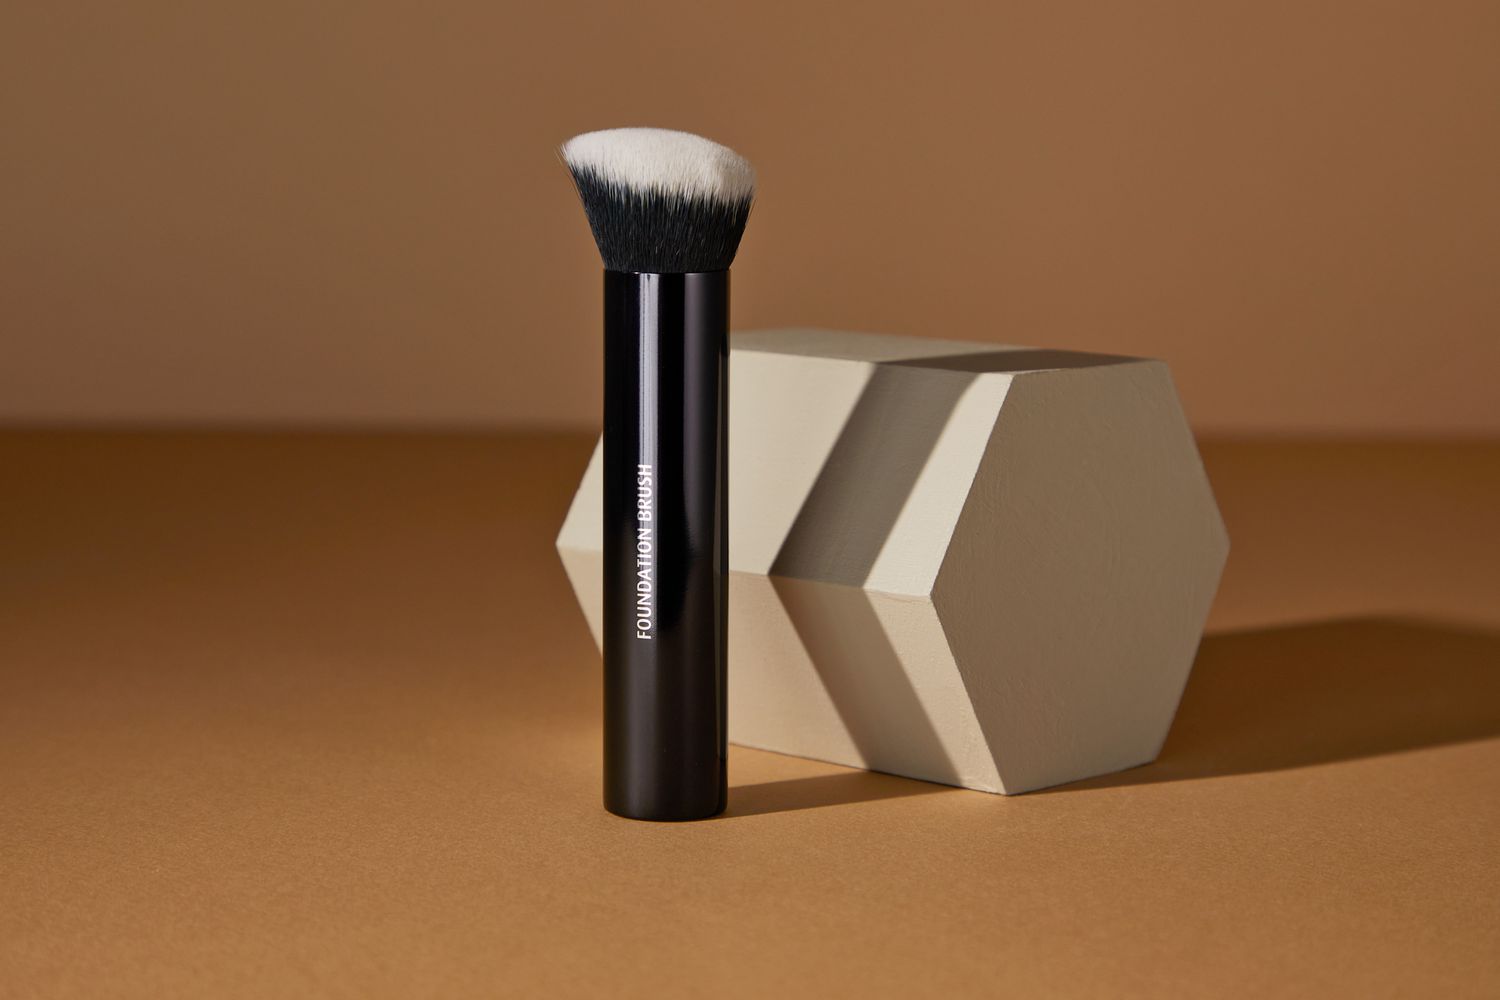 Lune+Aster Foundation Brush standing upright next to a hexagon block